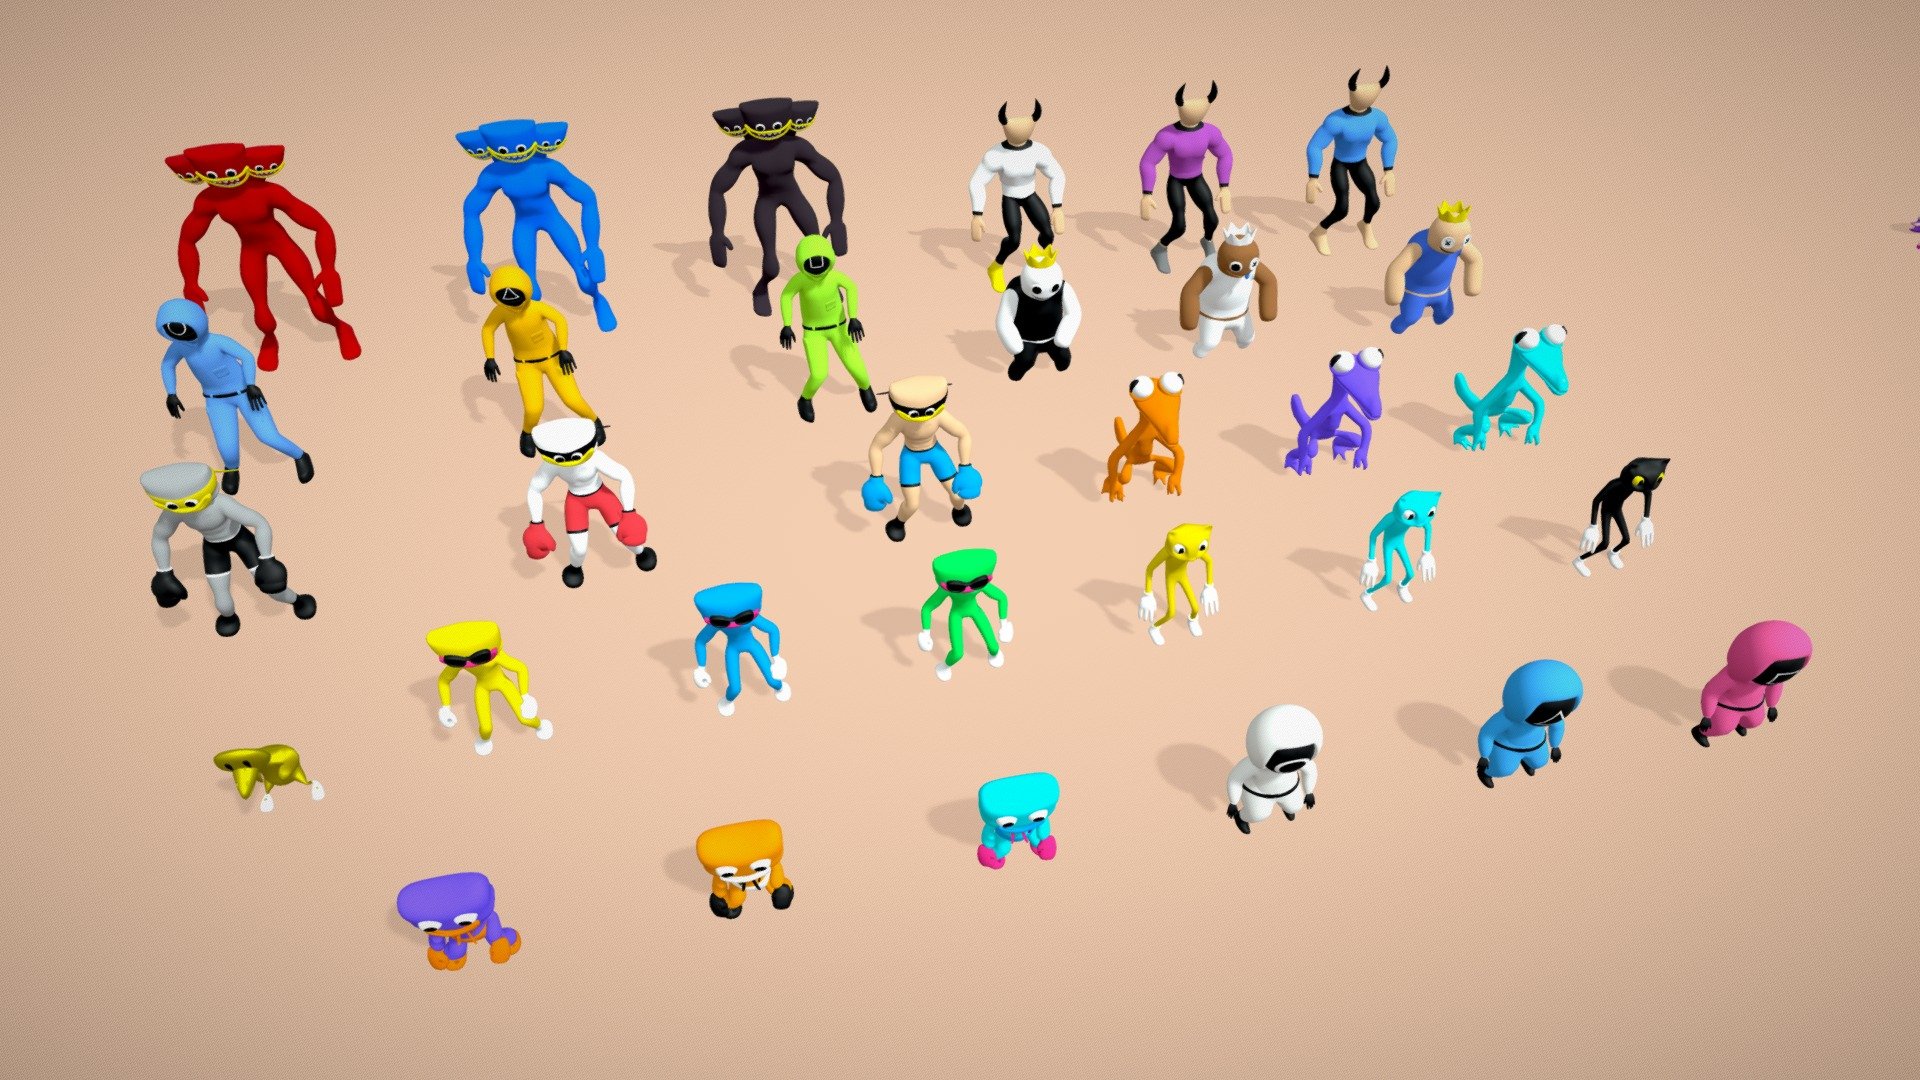 Presenting Mix Characters Pack includes low poly hyper-casual characters such as Rainbow Friends, Poppy, huggy, Kissy Missy, FNF Gf, FNF Bf characters and Squid Game Workers. 

This low-poly set of mix characters can be used for creating games in the Hyper Casual genre. Characters have the mixamo Rig and  Animation.
You can make color variants by changing their material colors.

Buy this character pack for your game or any other purposes at a very budget-friendly price rate. Please like and give valuable comments for this pack. Thank You 3d model